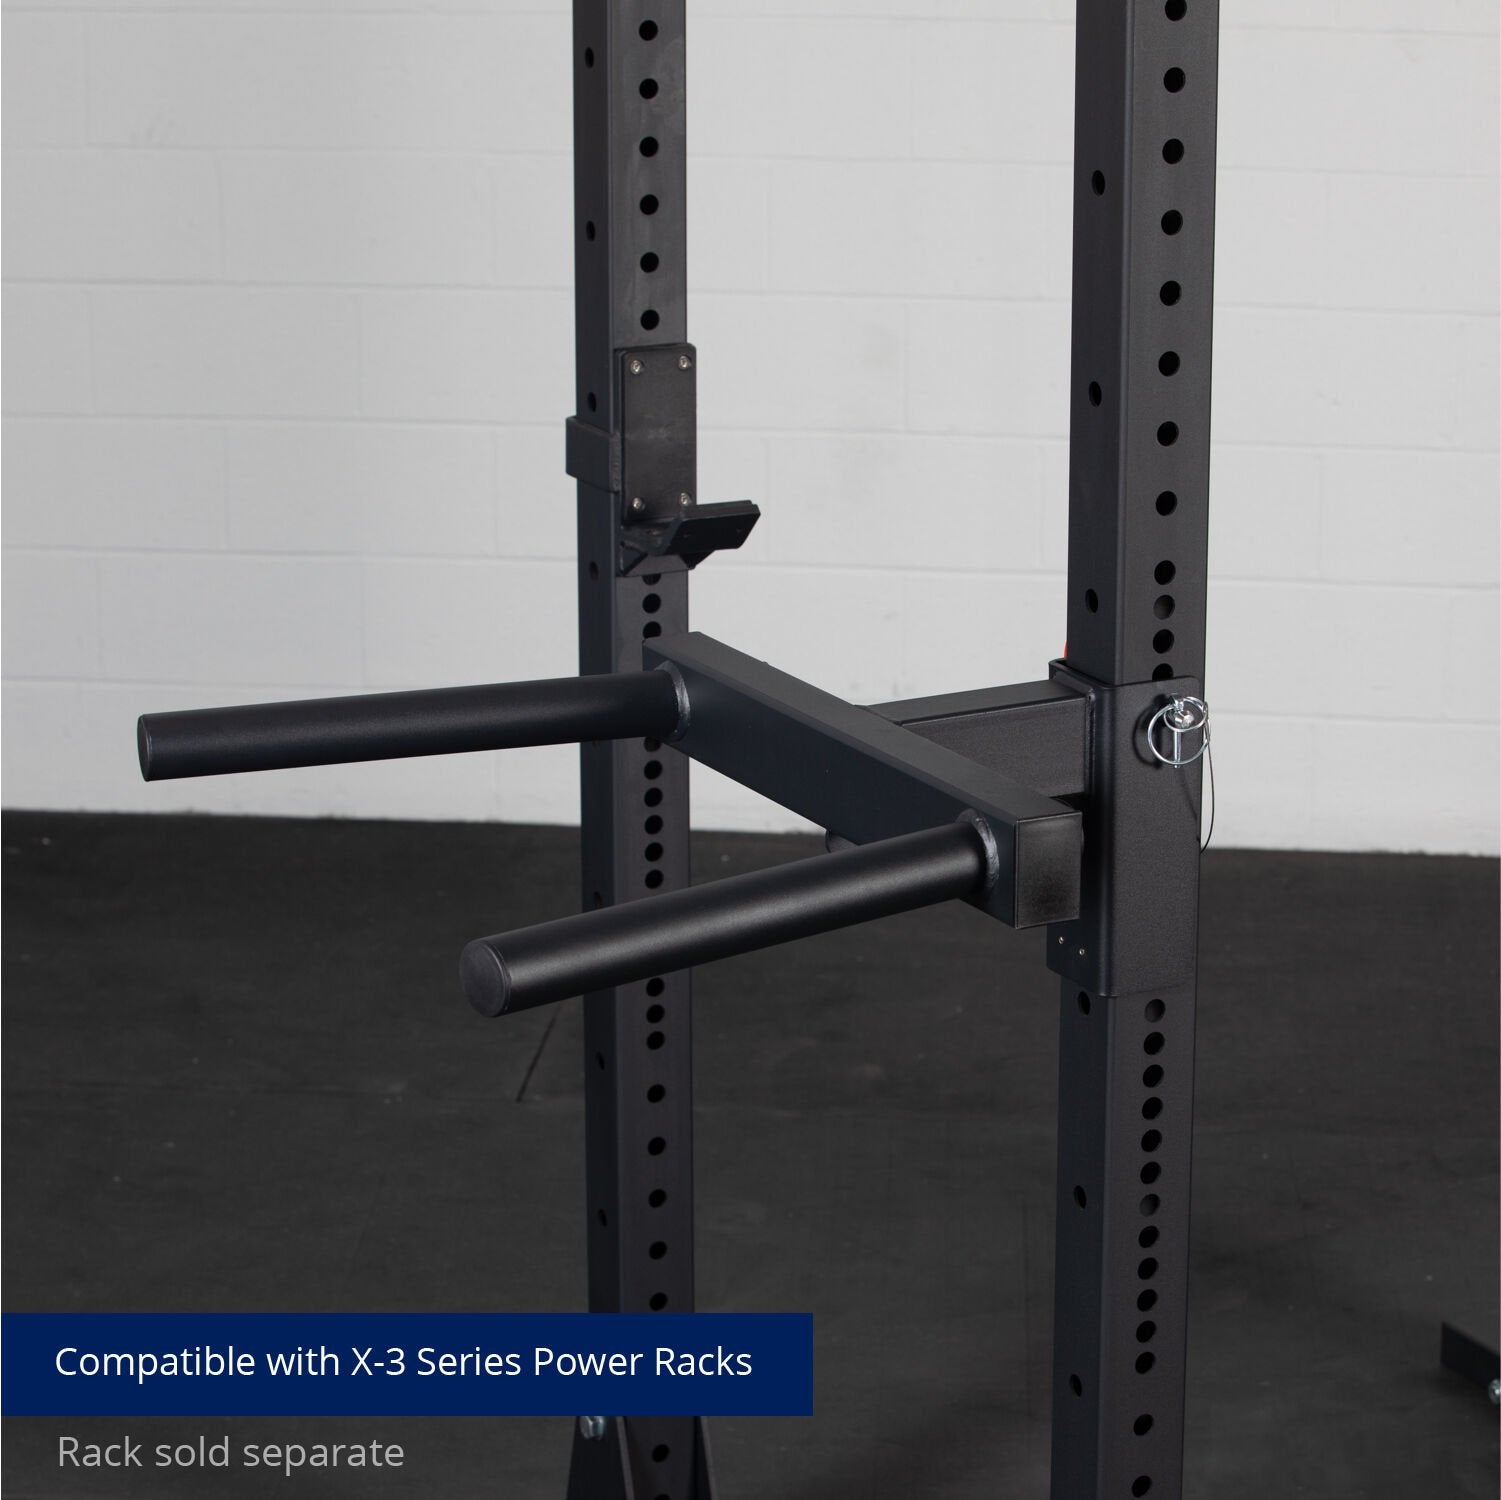 A pair of sturdy, black Titan Fitness X-3 Series Y-Dip Attachments attached to a power rack, declared as compatible with x-3 series power racks, for enhancing workout routines with dip exercises